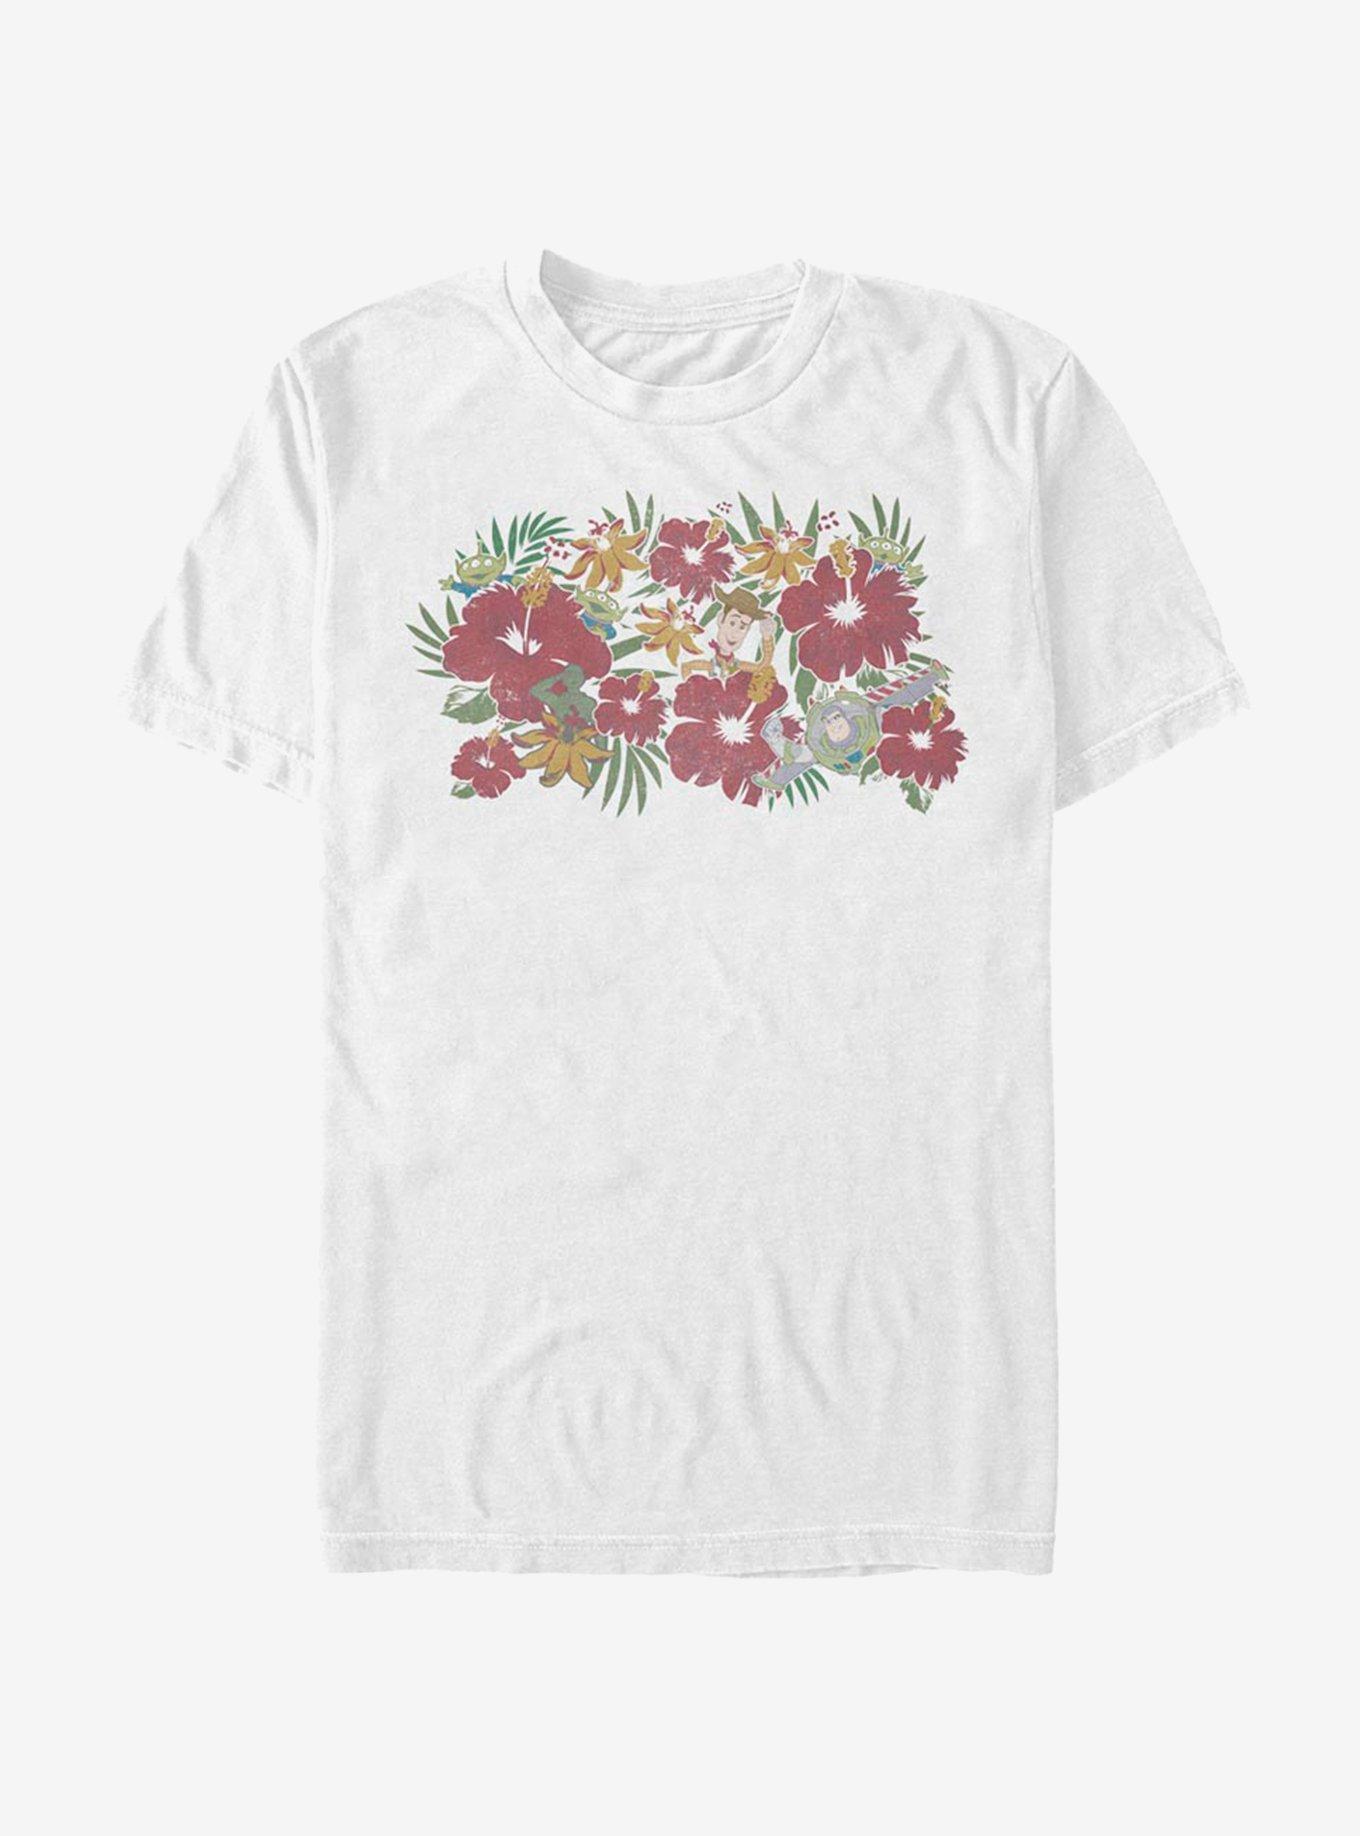 Disney Pixar Toy Story Toy Flowers T-Shirt - WHITE | BoxLunch